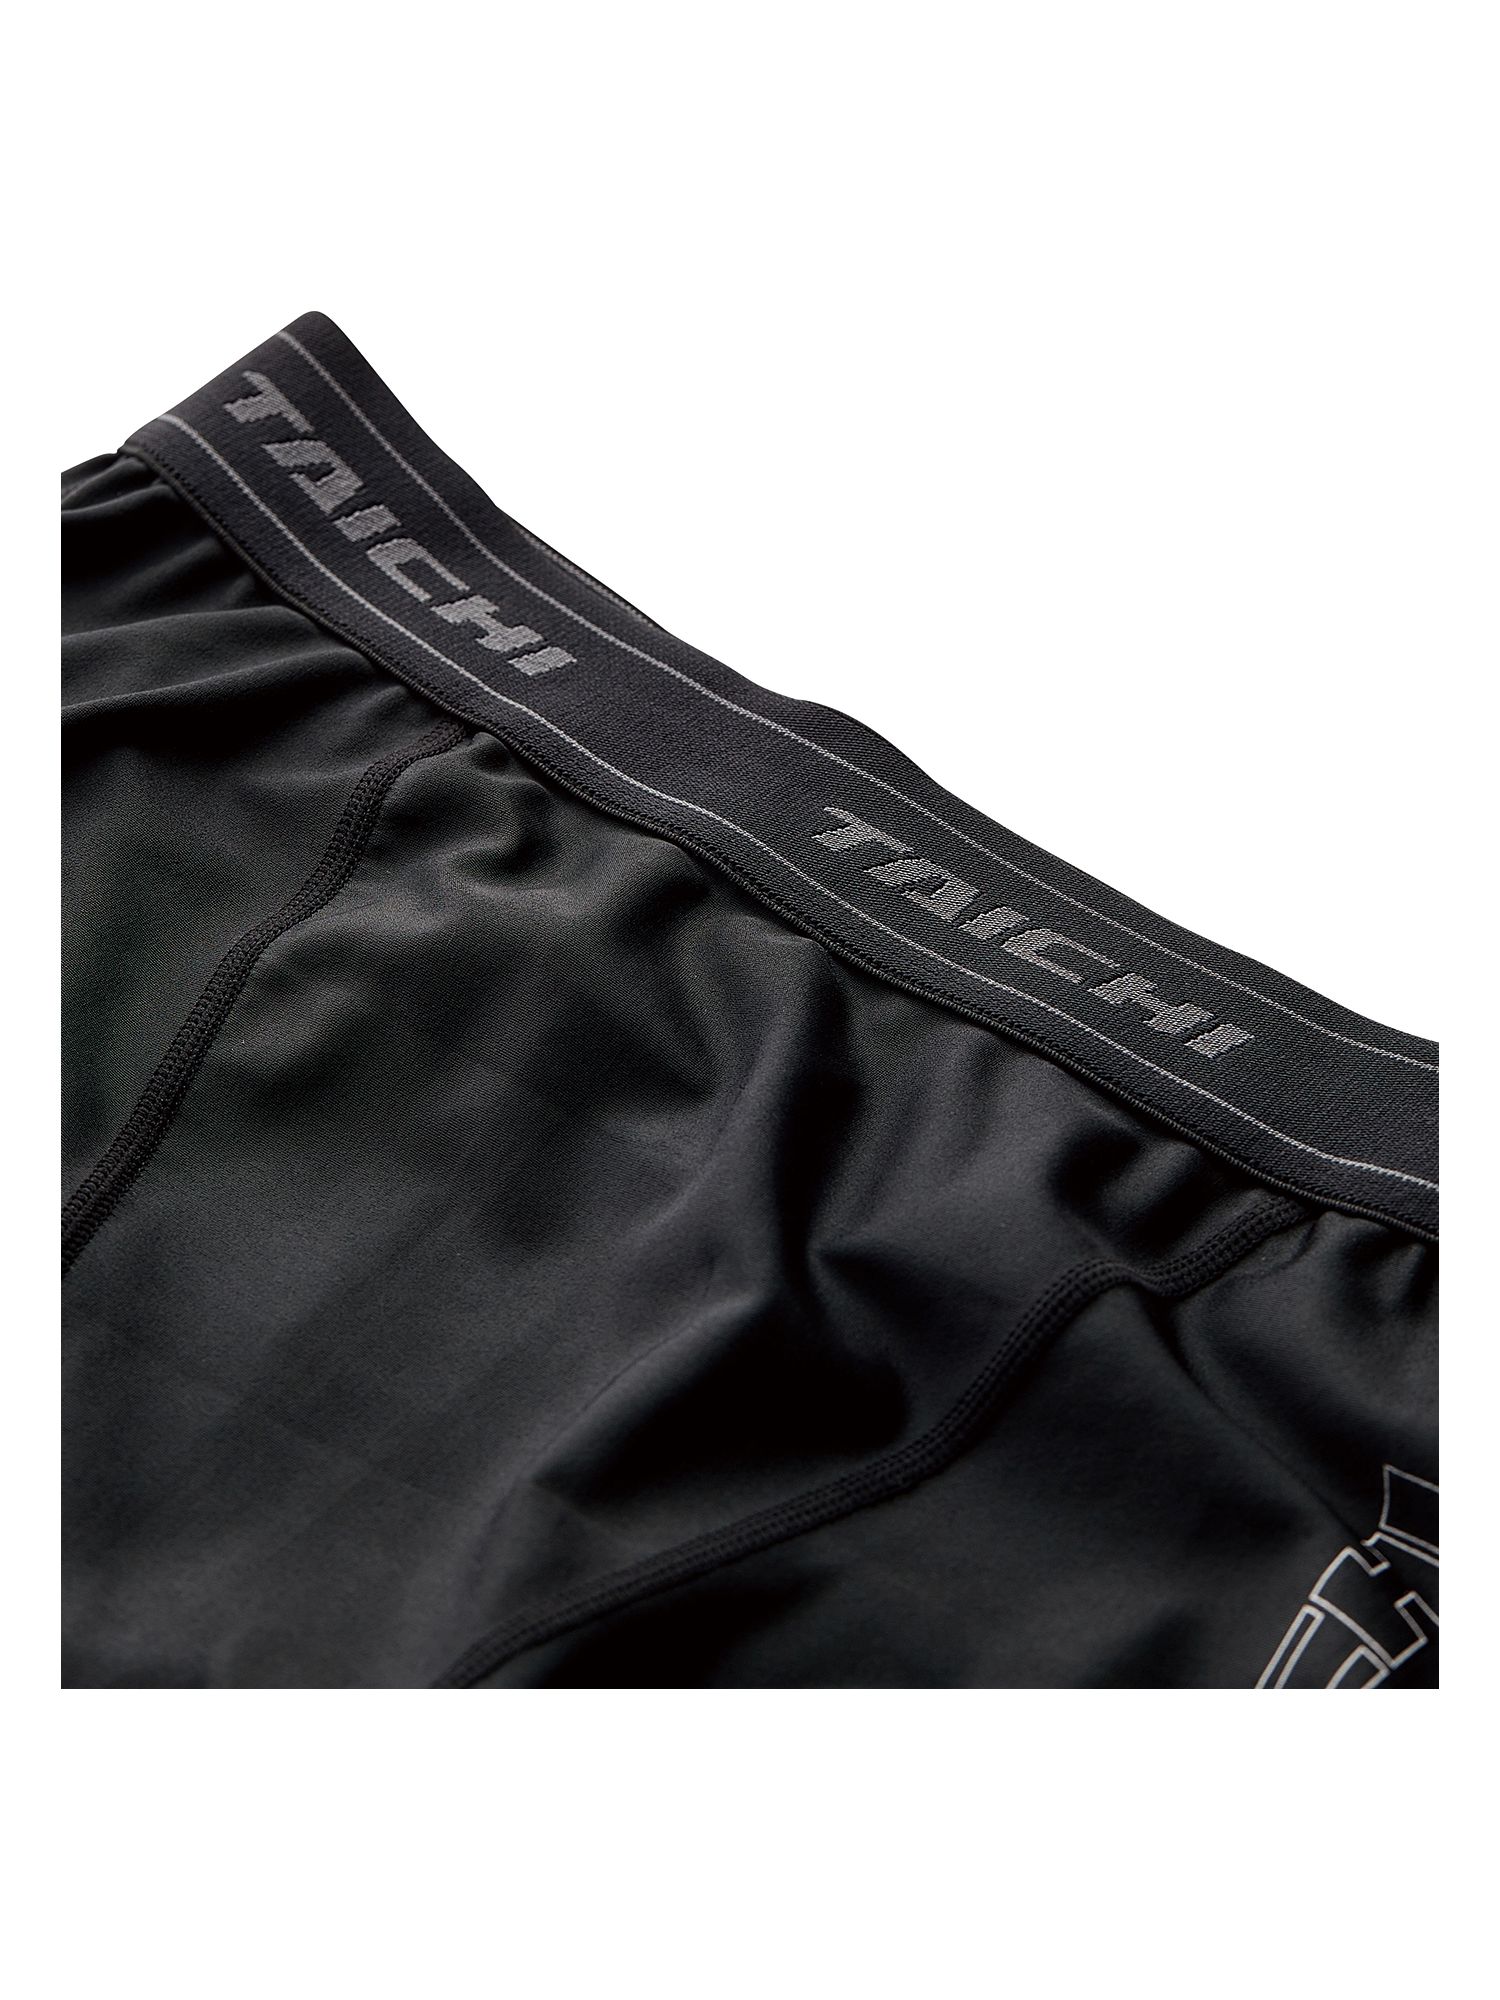 RSU321 | COOL RIDE SPORTS UNDER PANTS［1color］